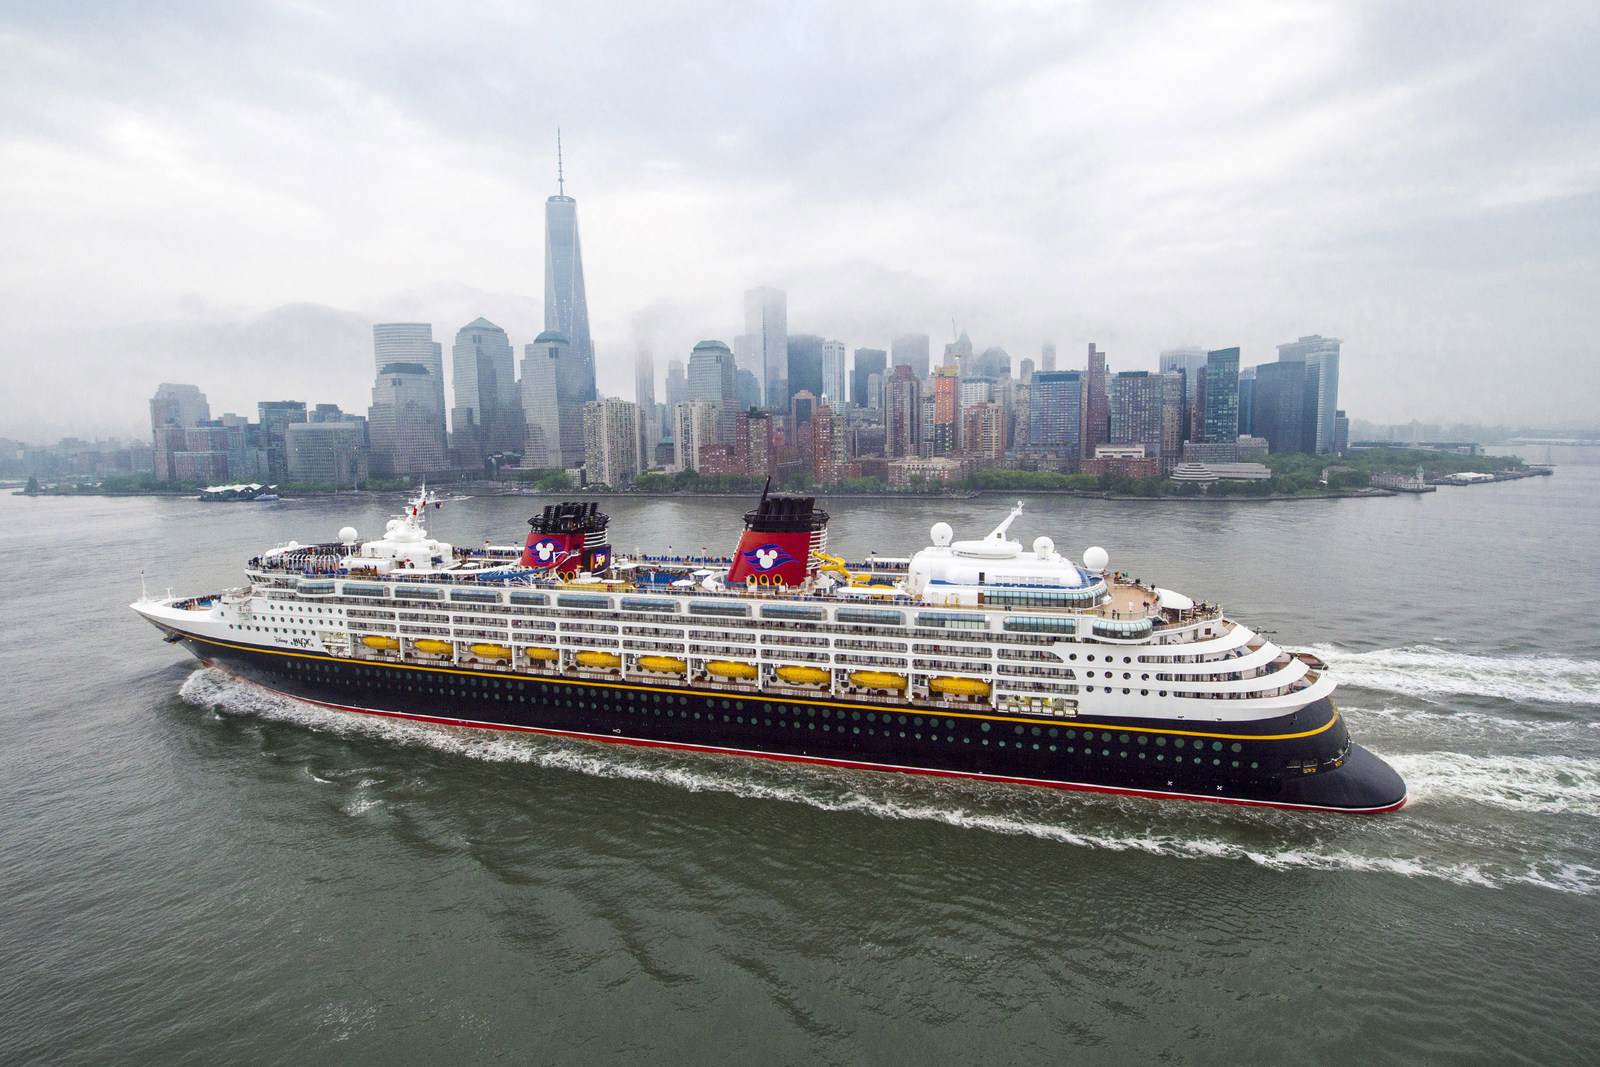 INTRAVELREPORT Disney Cruise Line sails to Bermuda for the first time